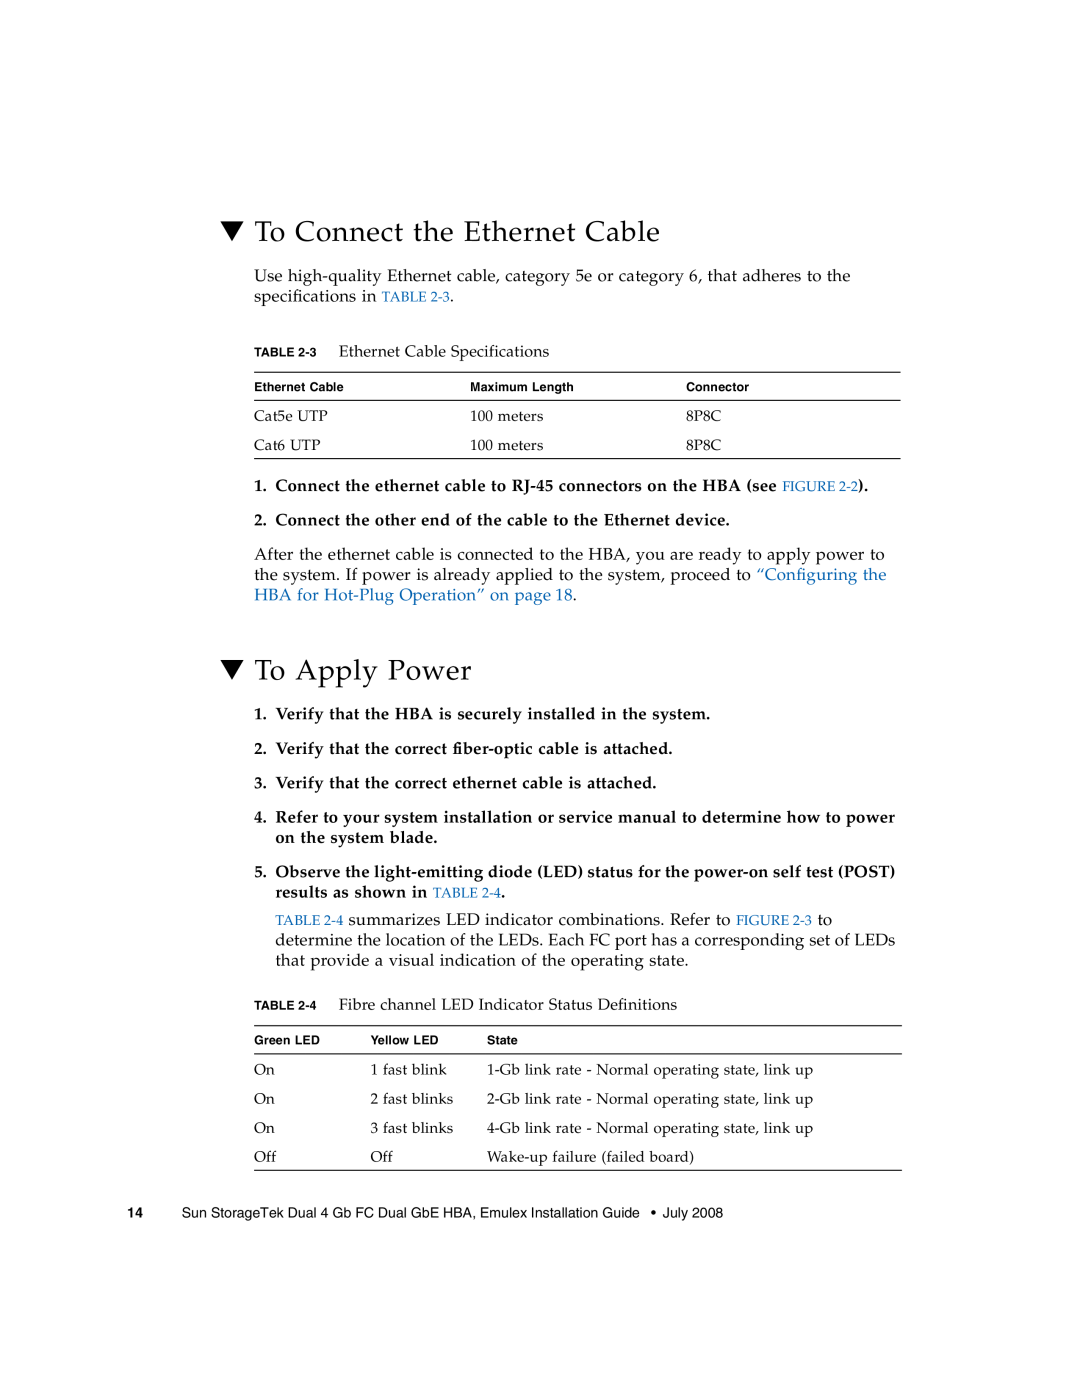 Sun Microsystems SG-XPCIE2FCGBE-E-Z manual To Connect the Ethernet Cable, To Apply Power 